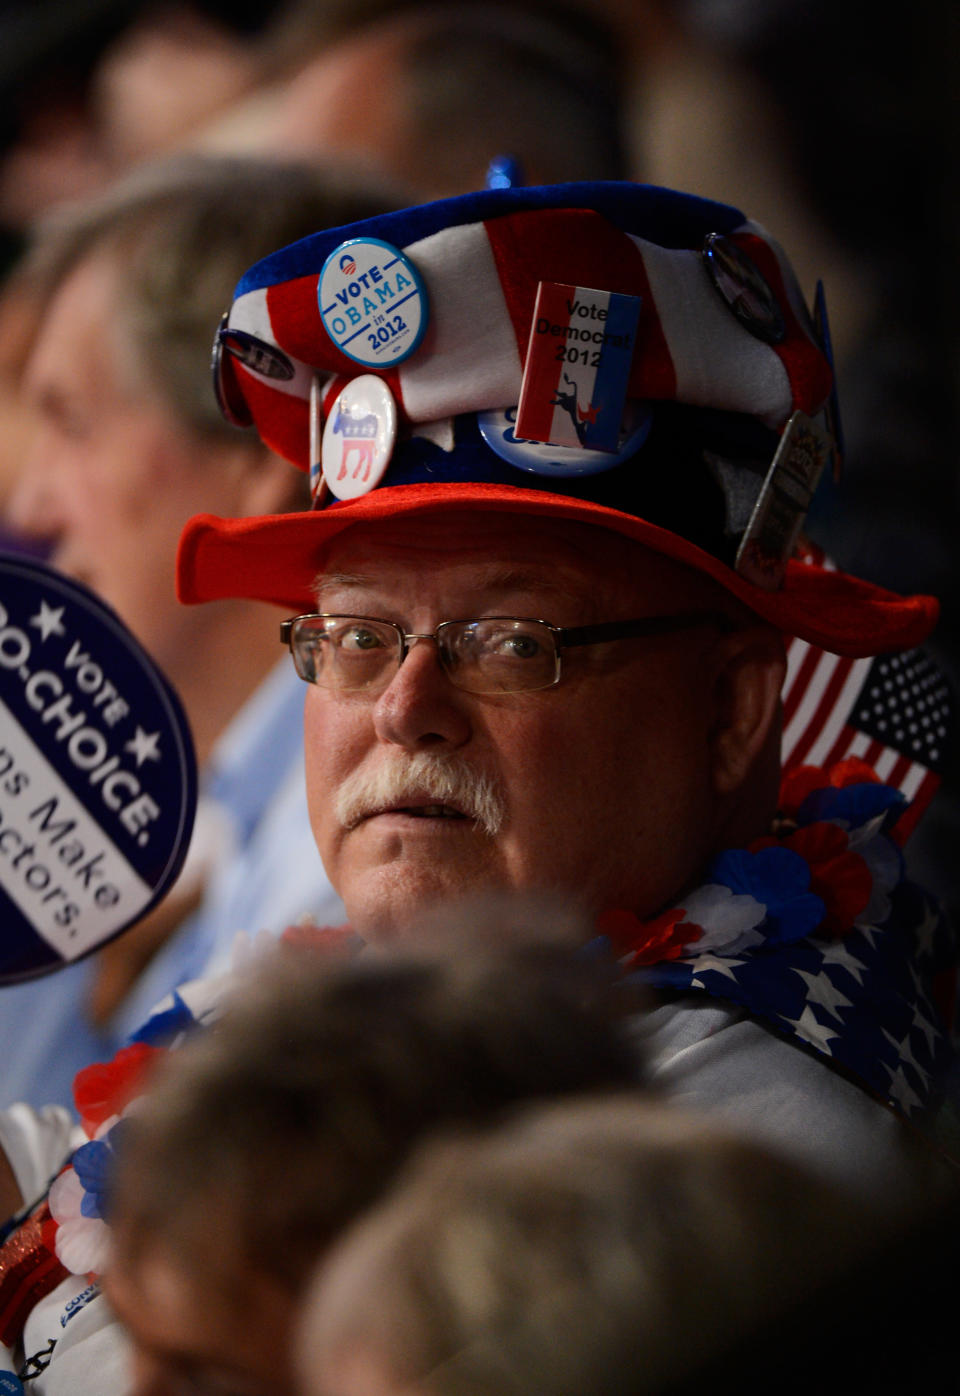 A man wears a hat decorated with campaign pins during the final day of the Democratic National Convention at Time Warner Cable Arena on September 6, 2012 in Charlotte, North Carolina. (Photo by Kevork Djansezian/Getty Images)